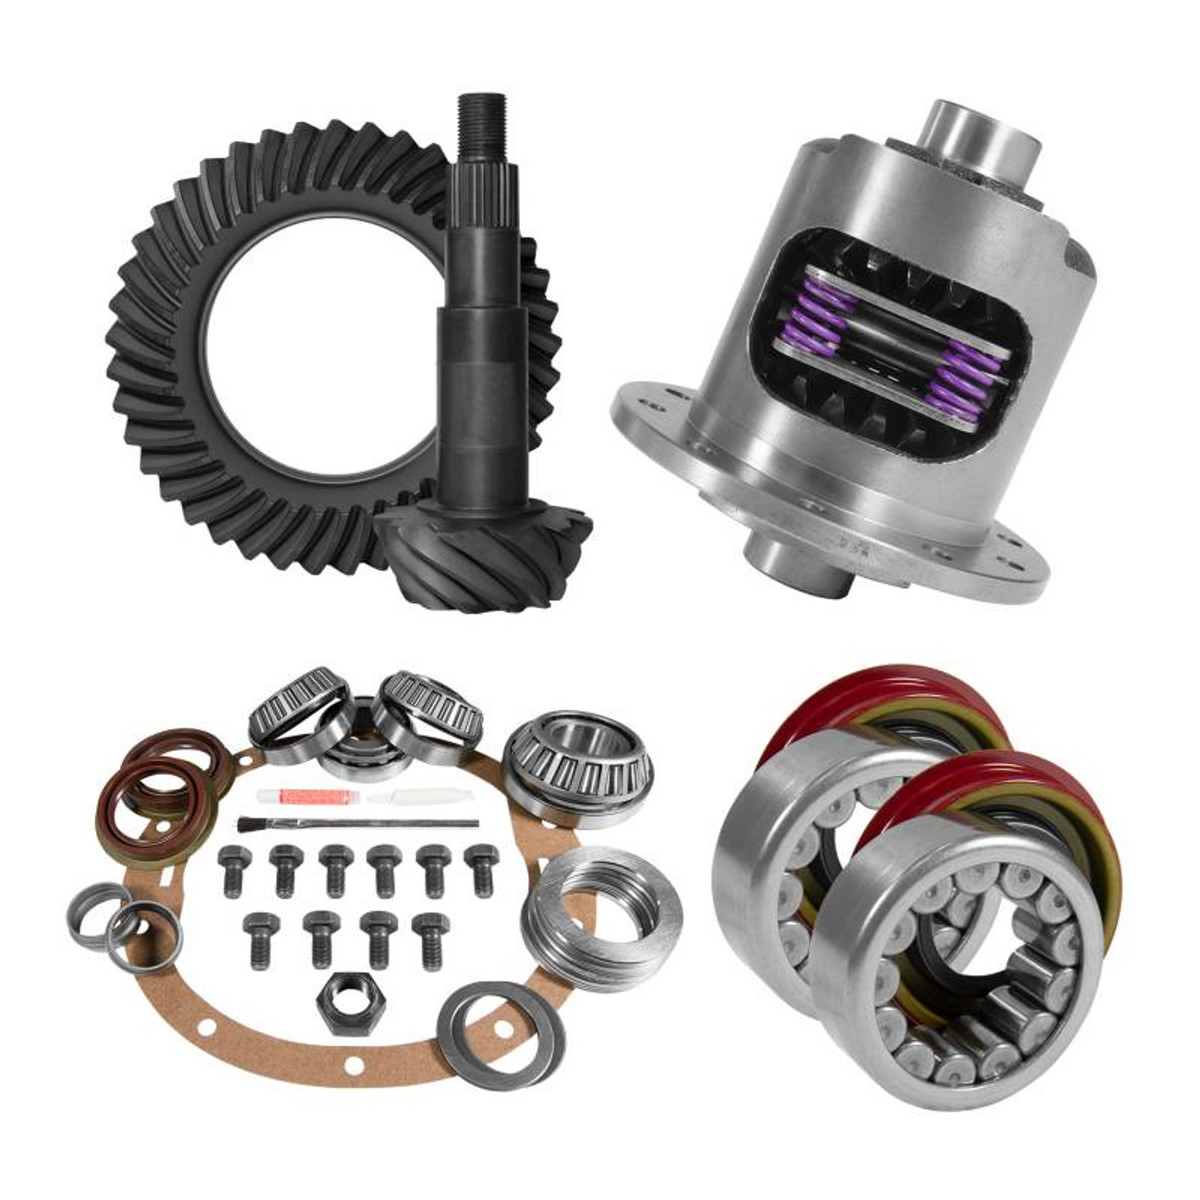 8.6 inch GM 4.56 Rear Ring and Pinion Install Kit 30 Spline Positraction Axle Bearings and Seals YGK2029